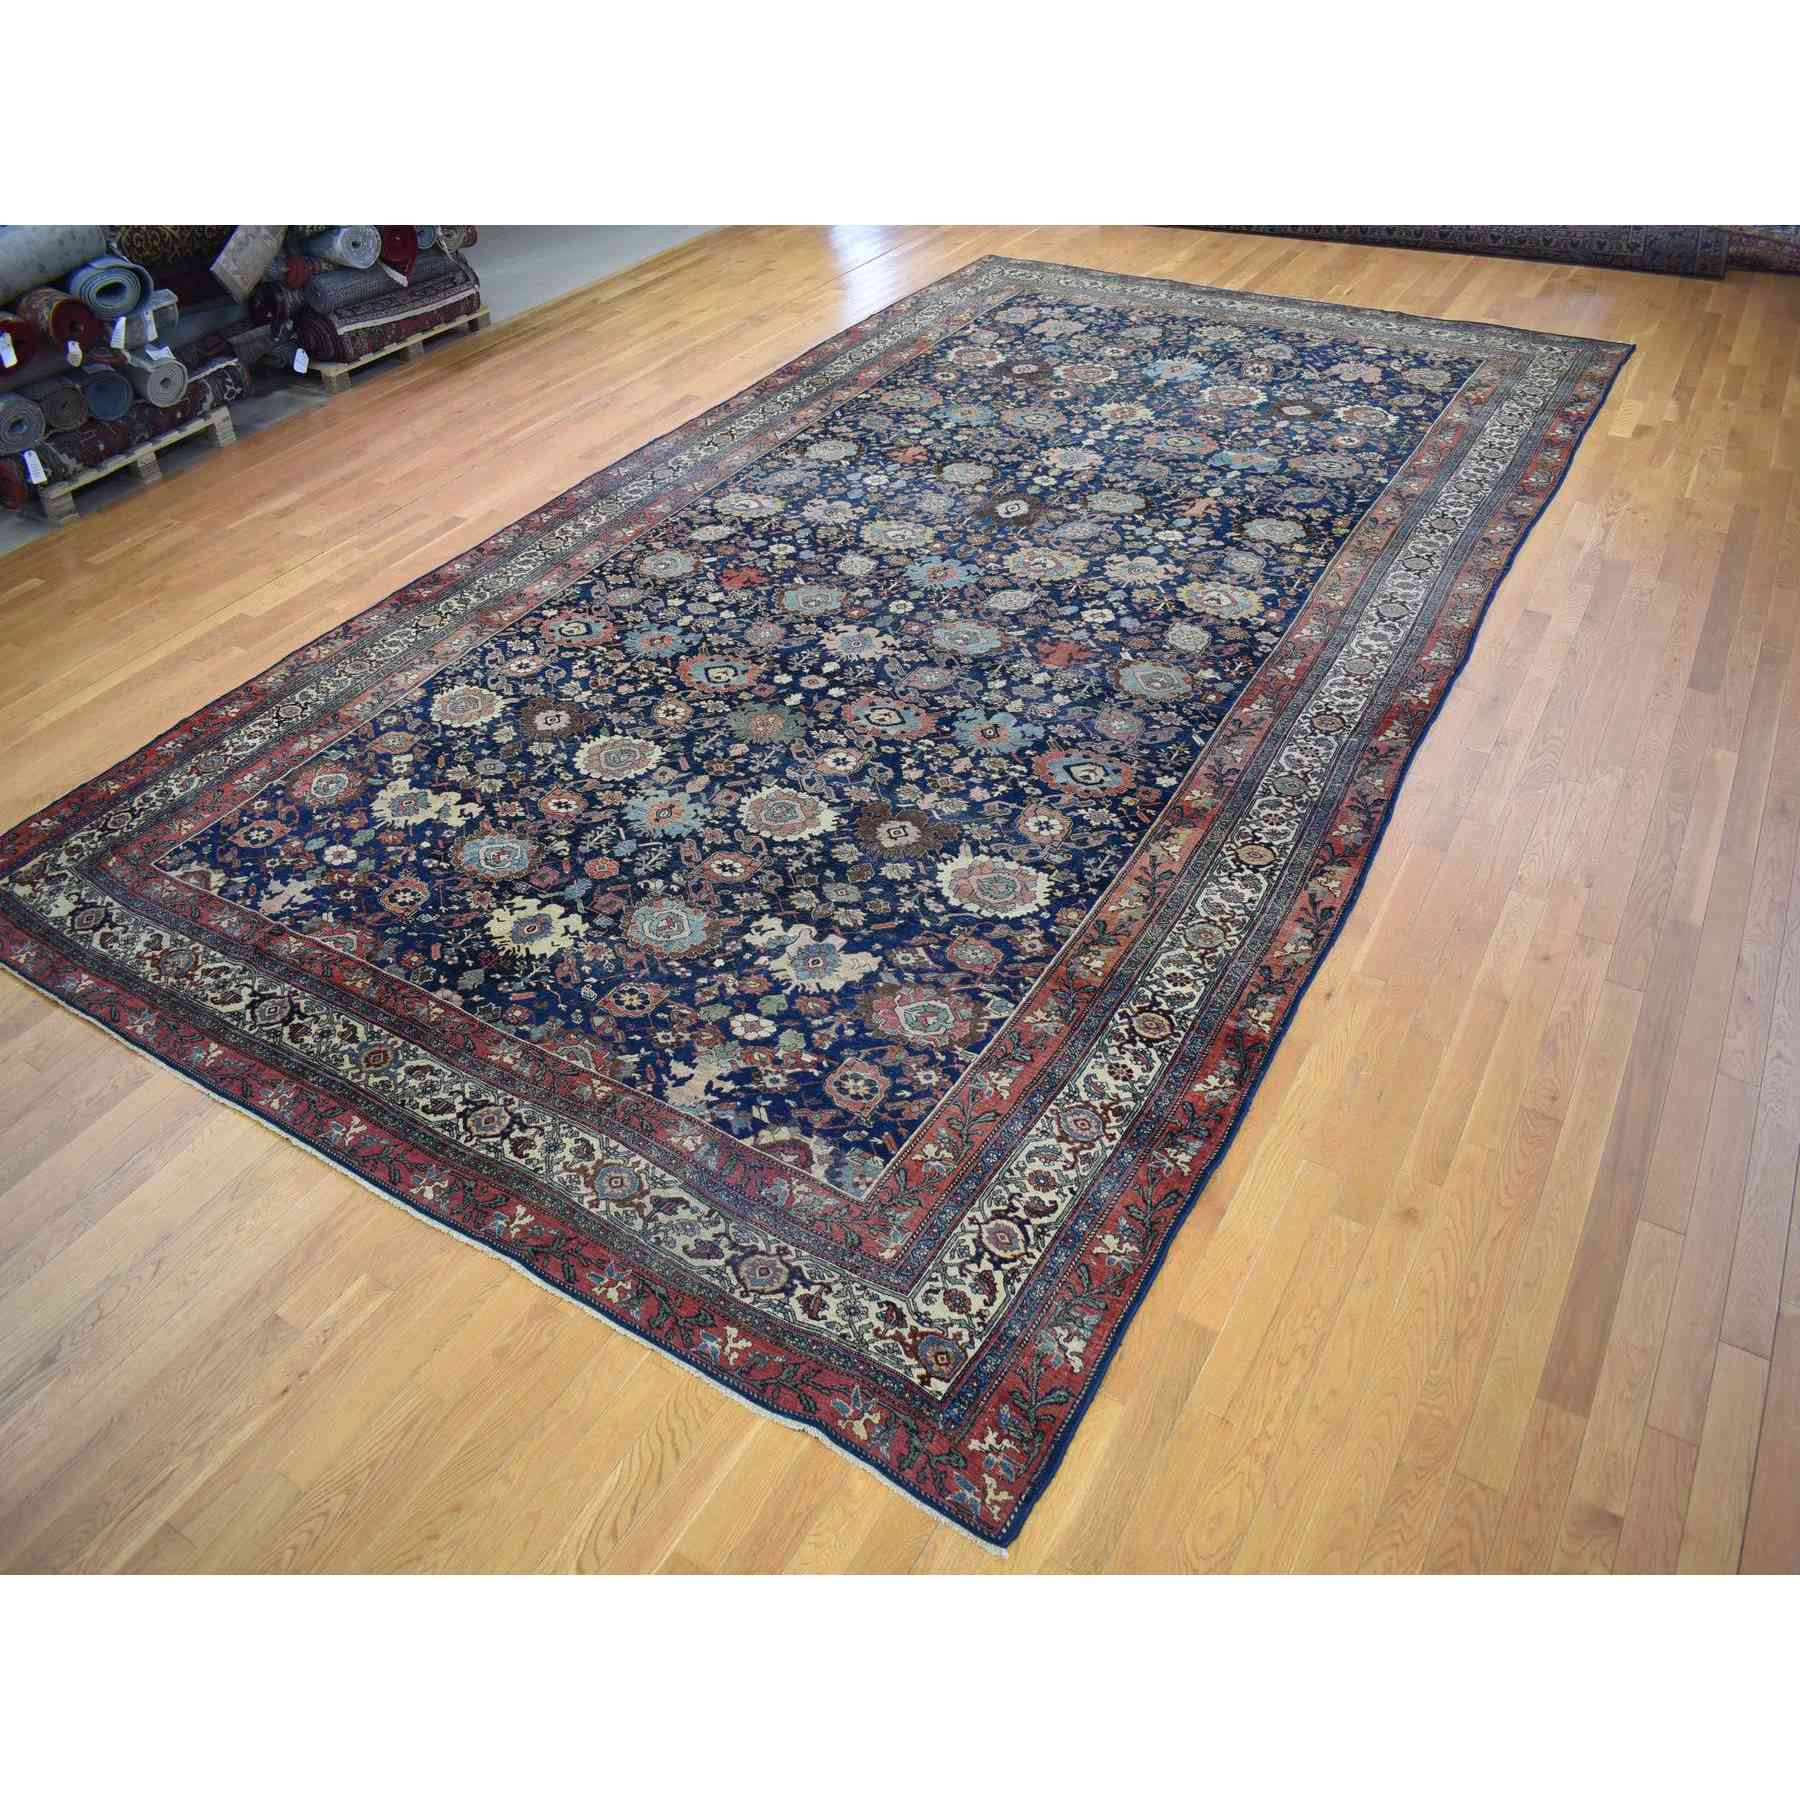 Antique-Hand-Knotted-Rug-400585